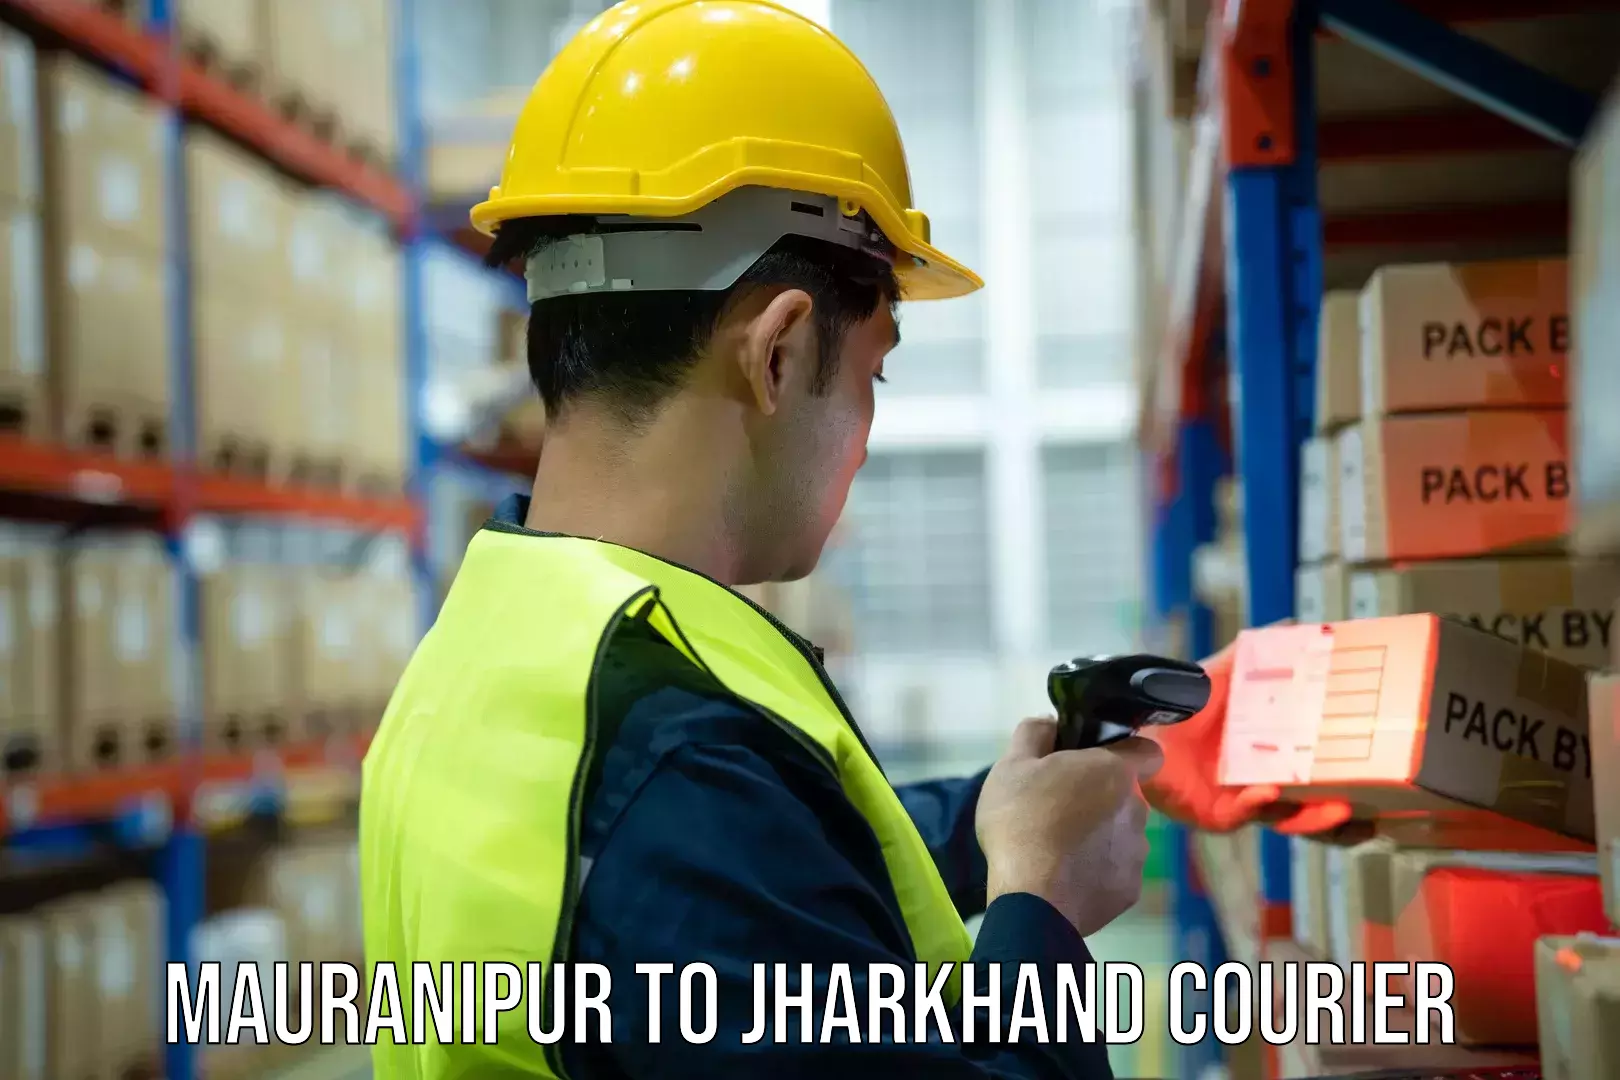 Comprehensive shipping network Mauranipur to Jharkhand